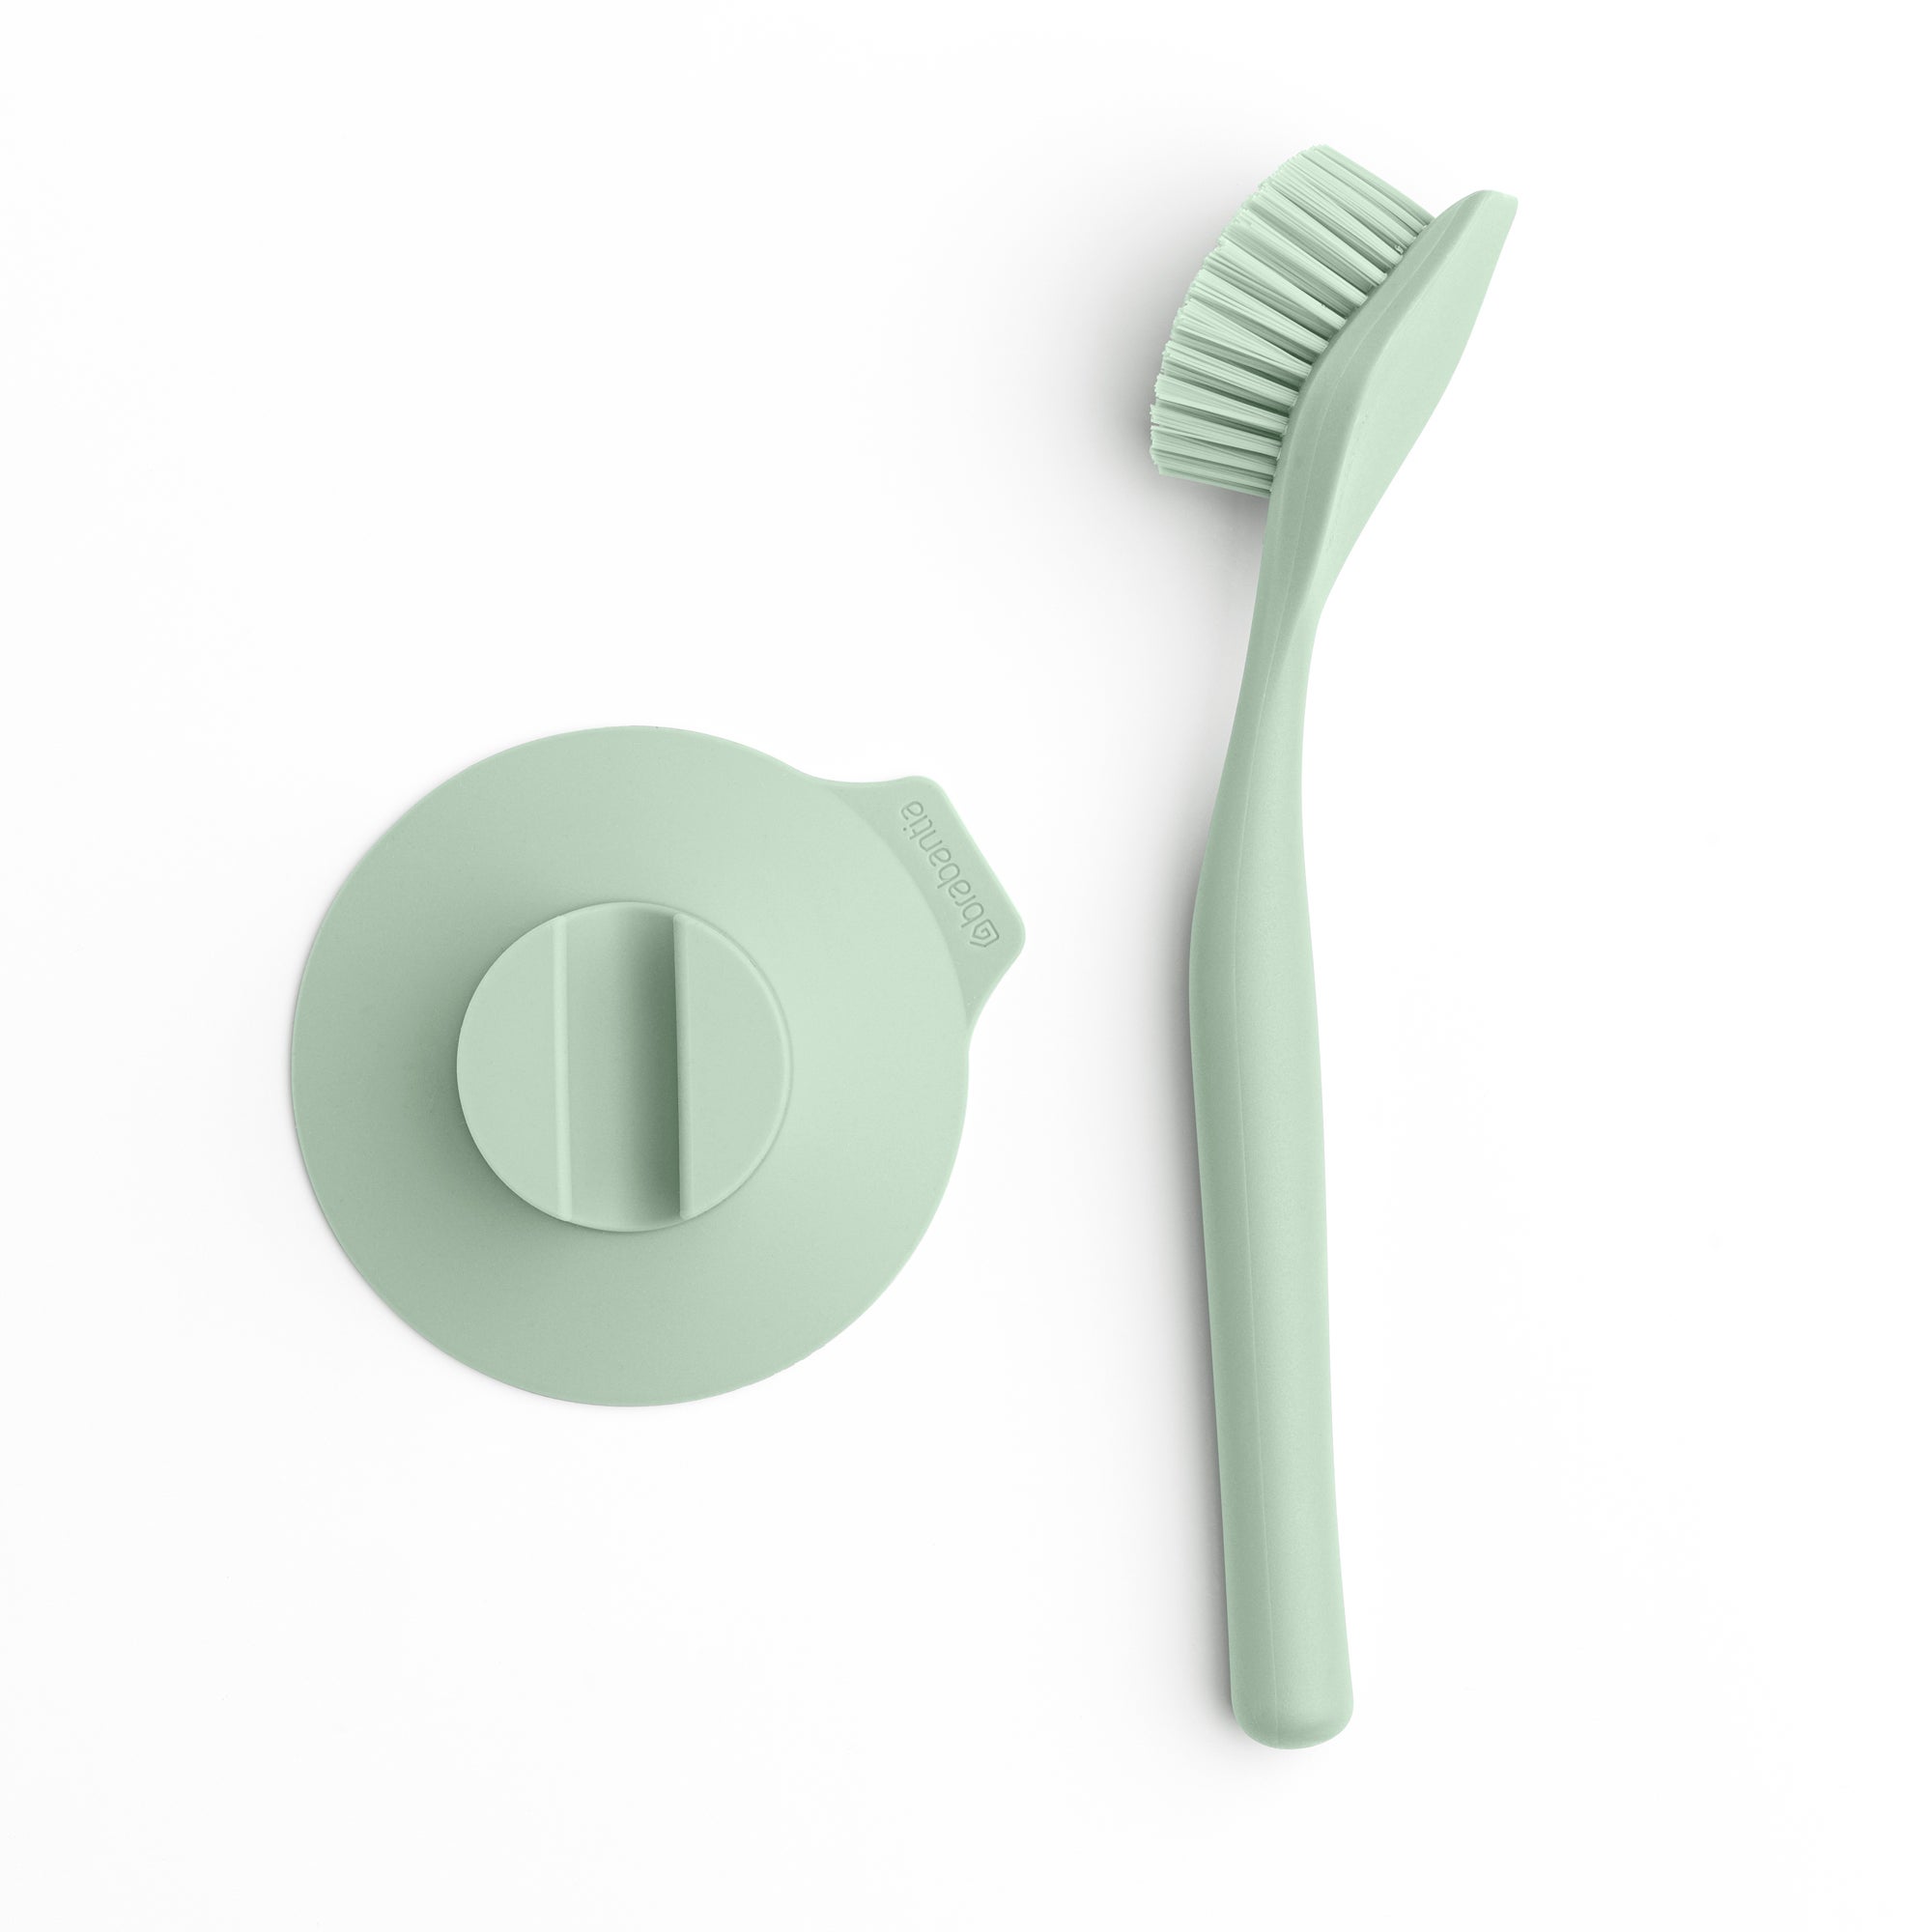 Brabantia Dish Brush With Suction Cup Holder Jade Green Green